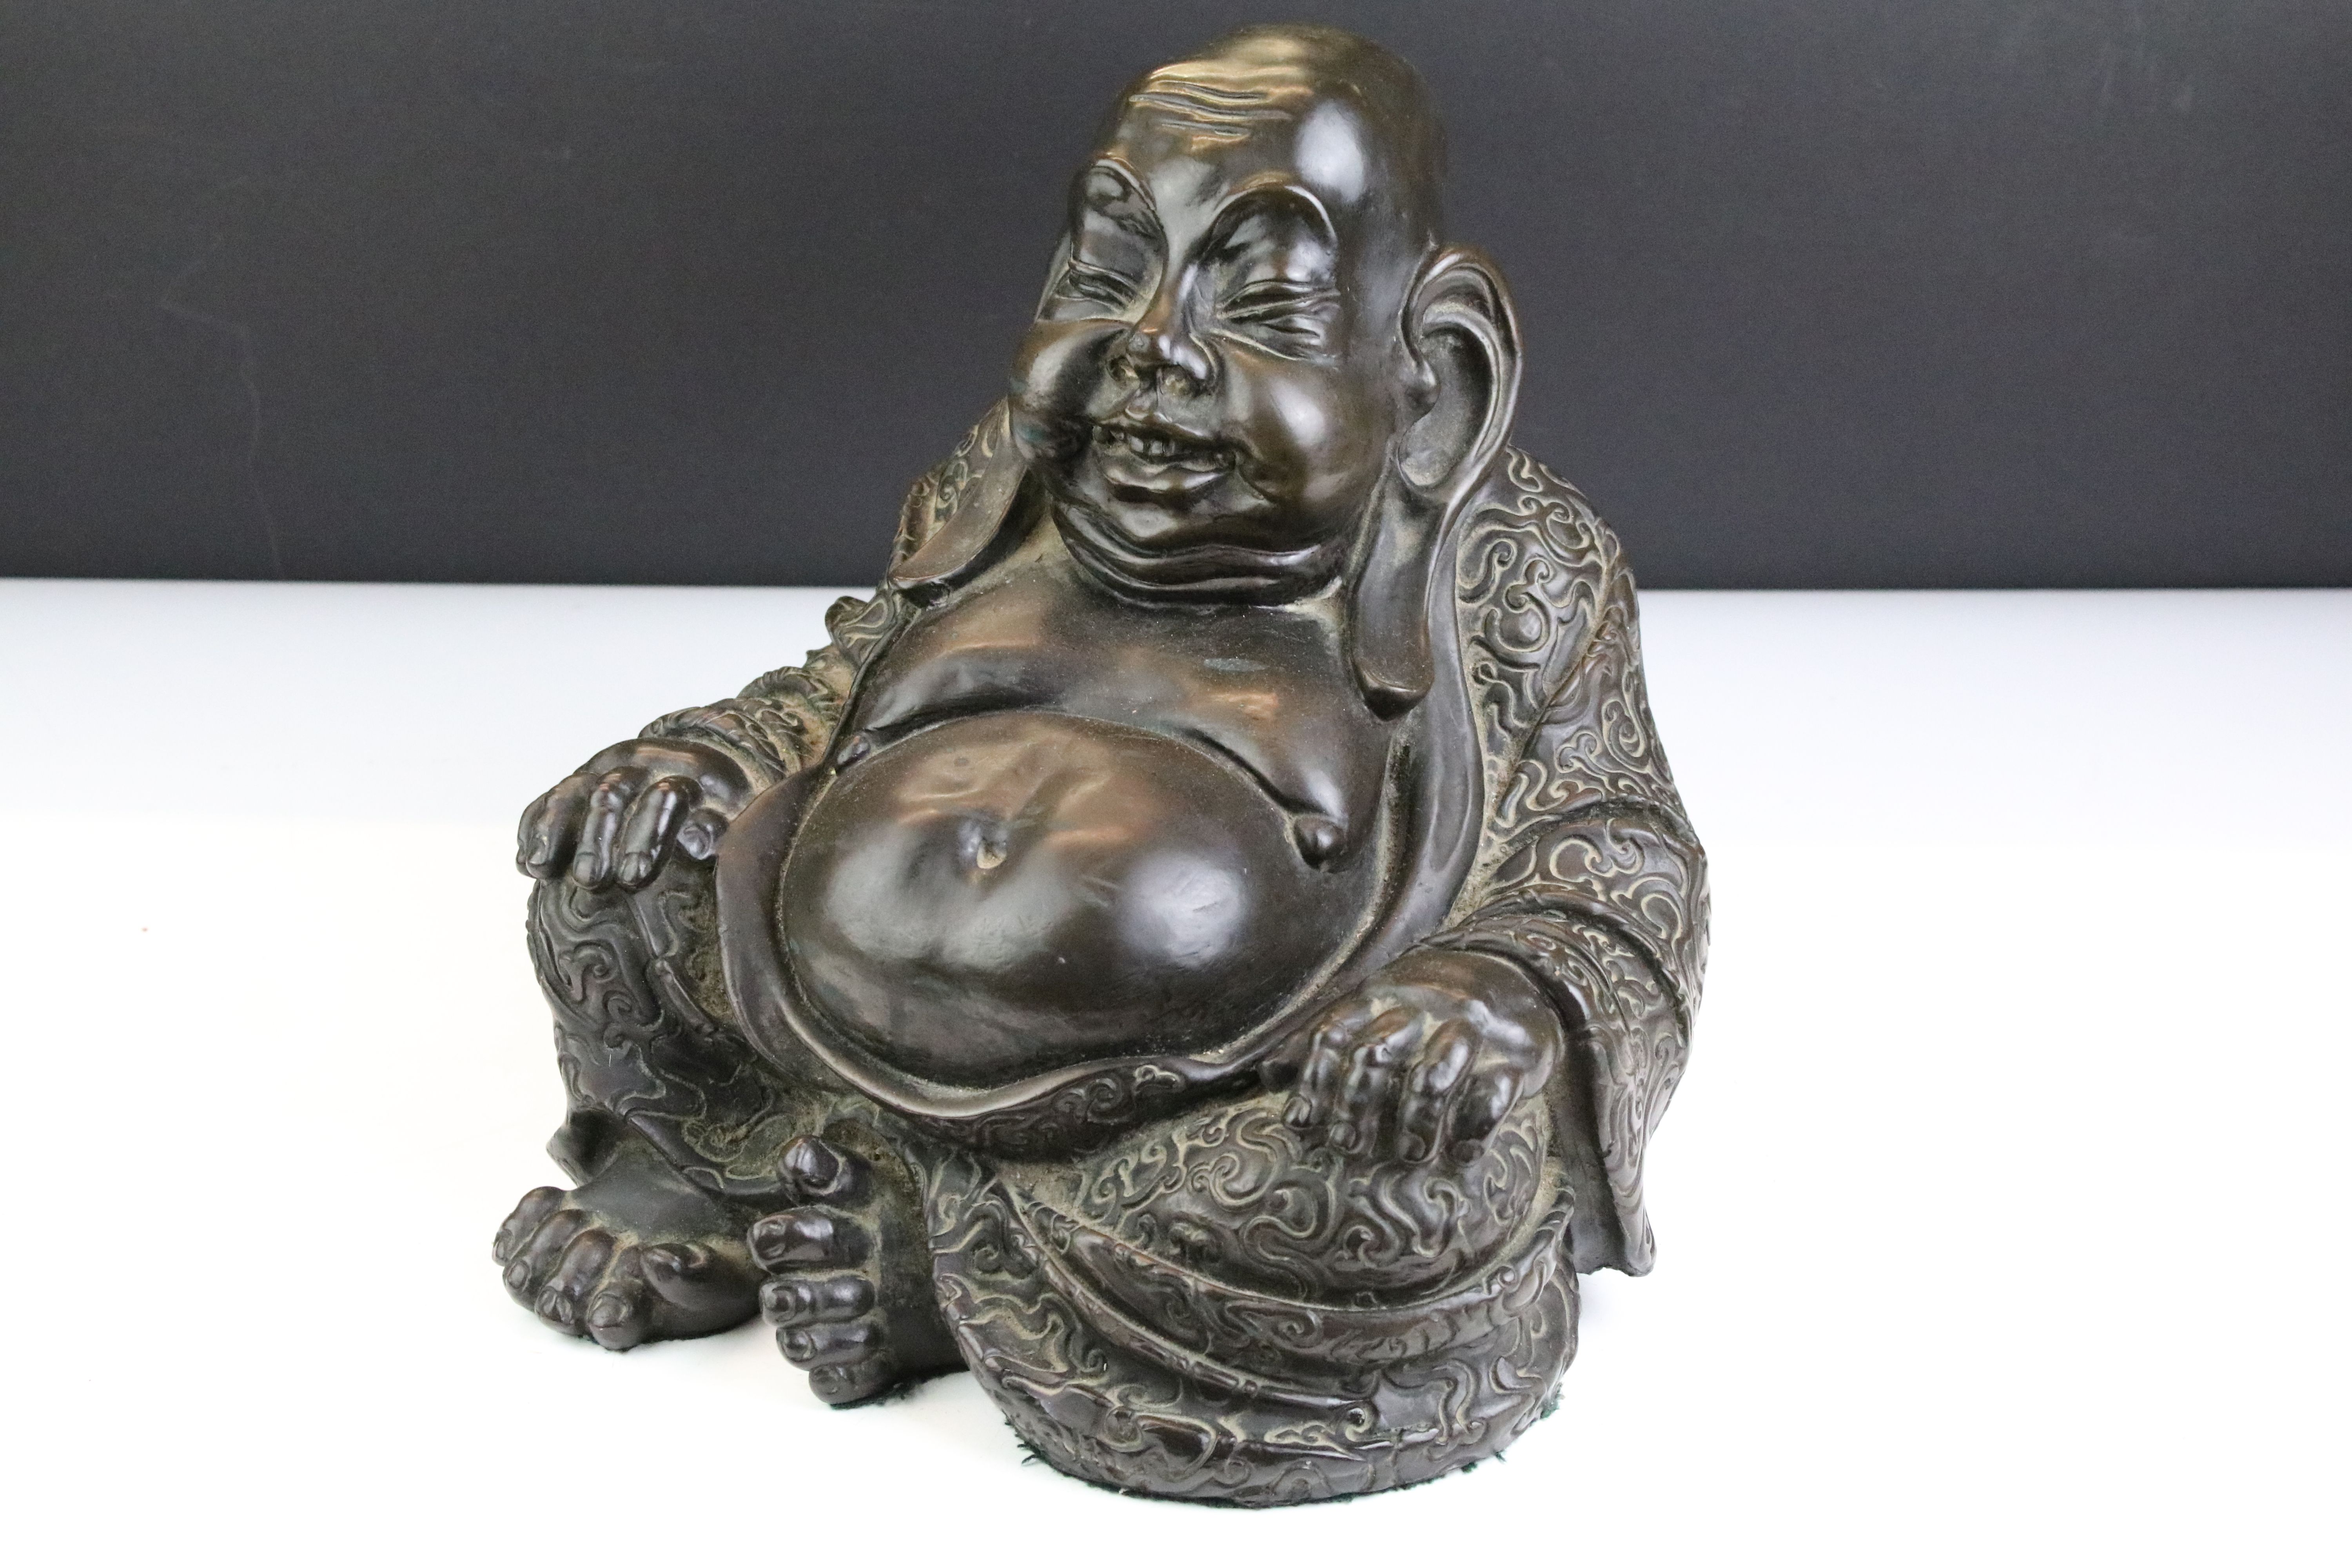 Large cast resin laughing Buddha figurine modelled seated in the lotus position. Measures 25cm tall.